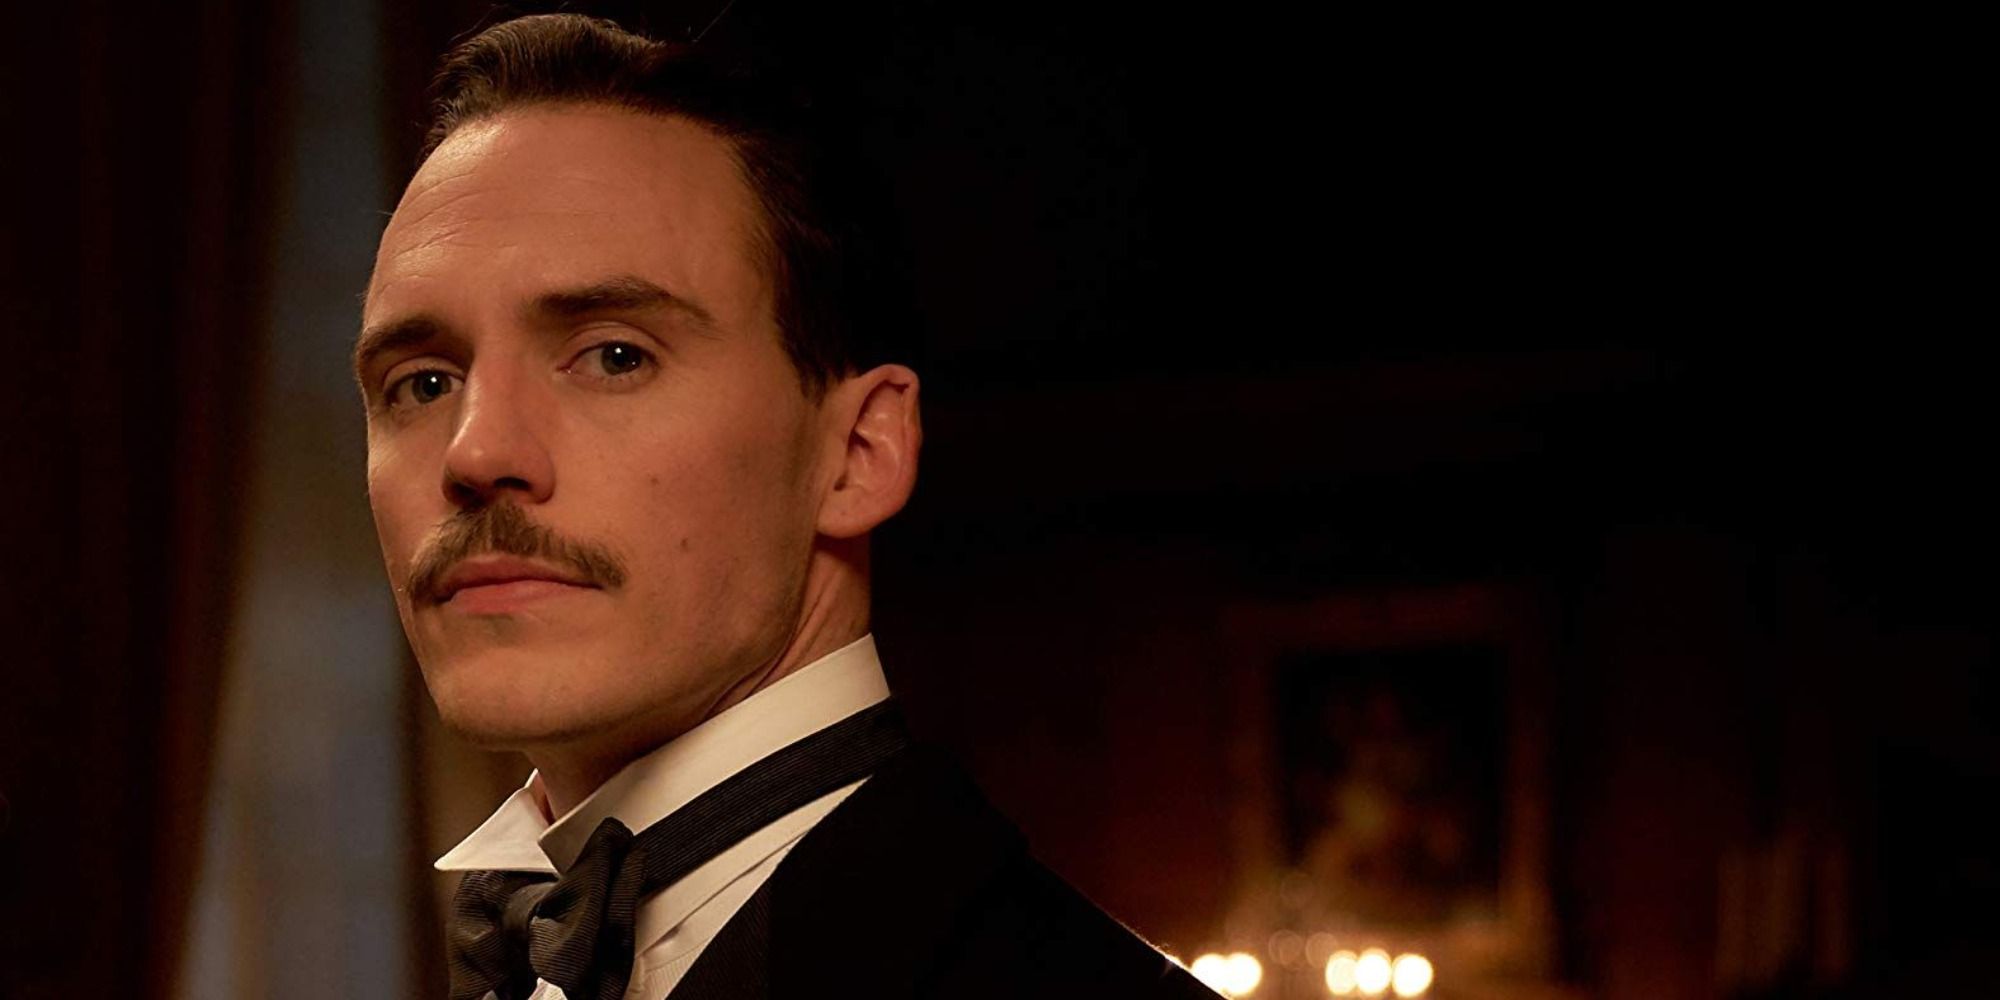 Close-up shot of Sam Claflin as Oswald Mosley in Peaky Blinders.